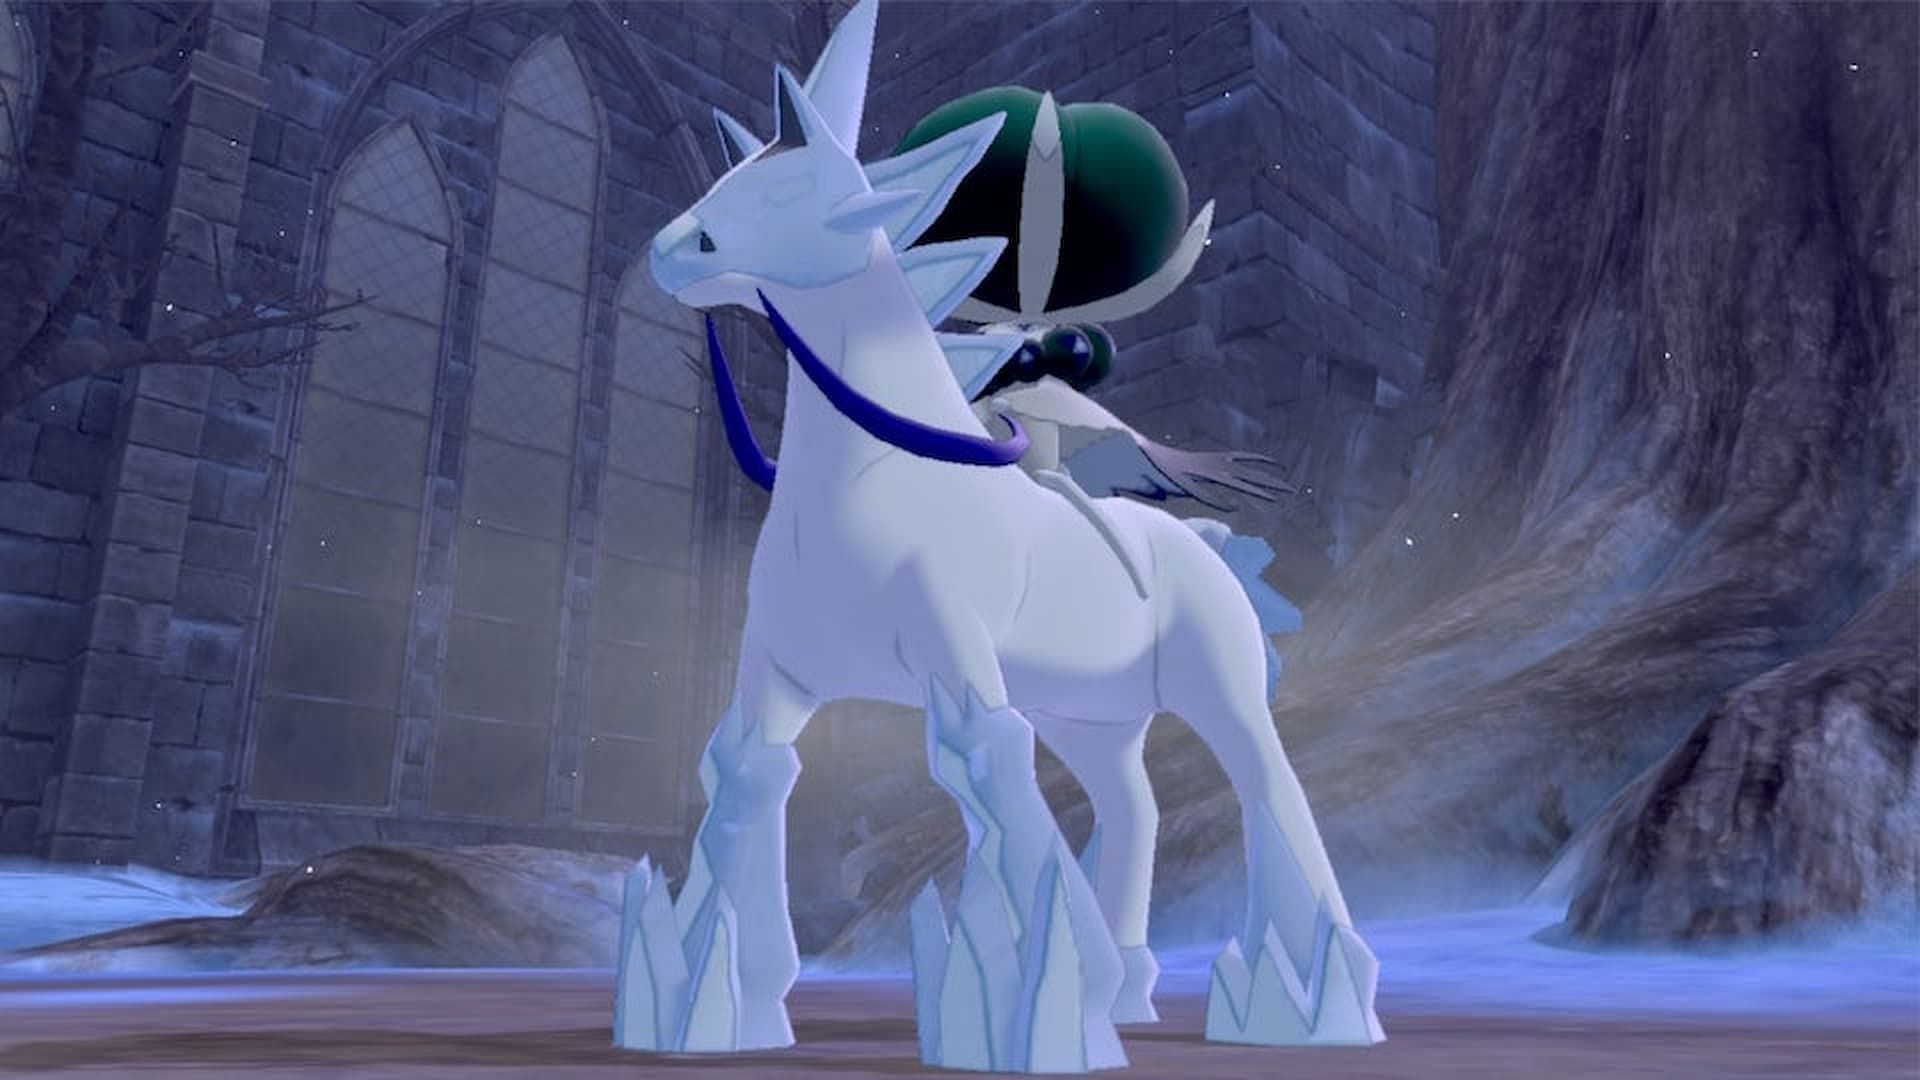 Calyrex - Ice Rider from the Sword and Shield DLC (Image via The Pokemon Company)